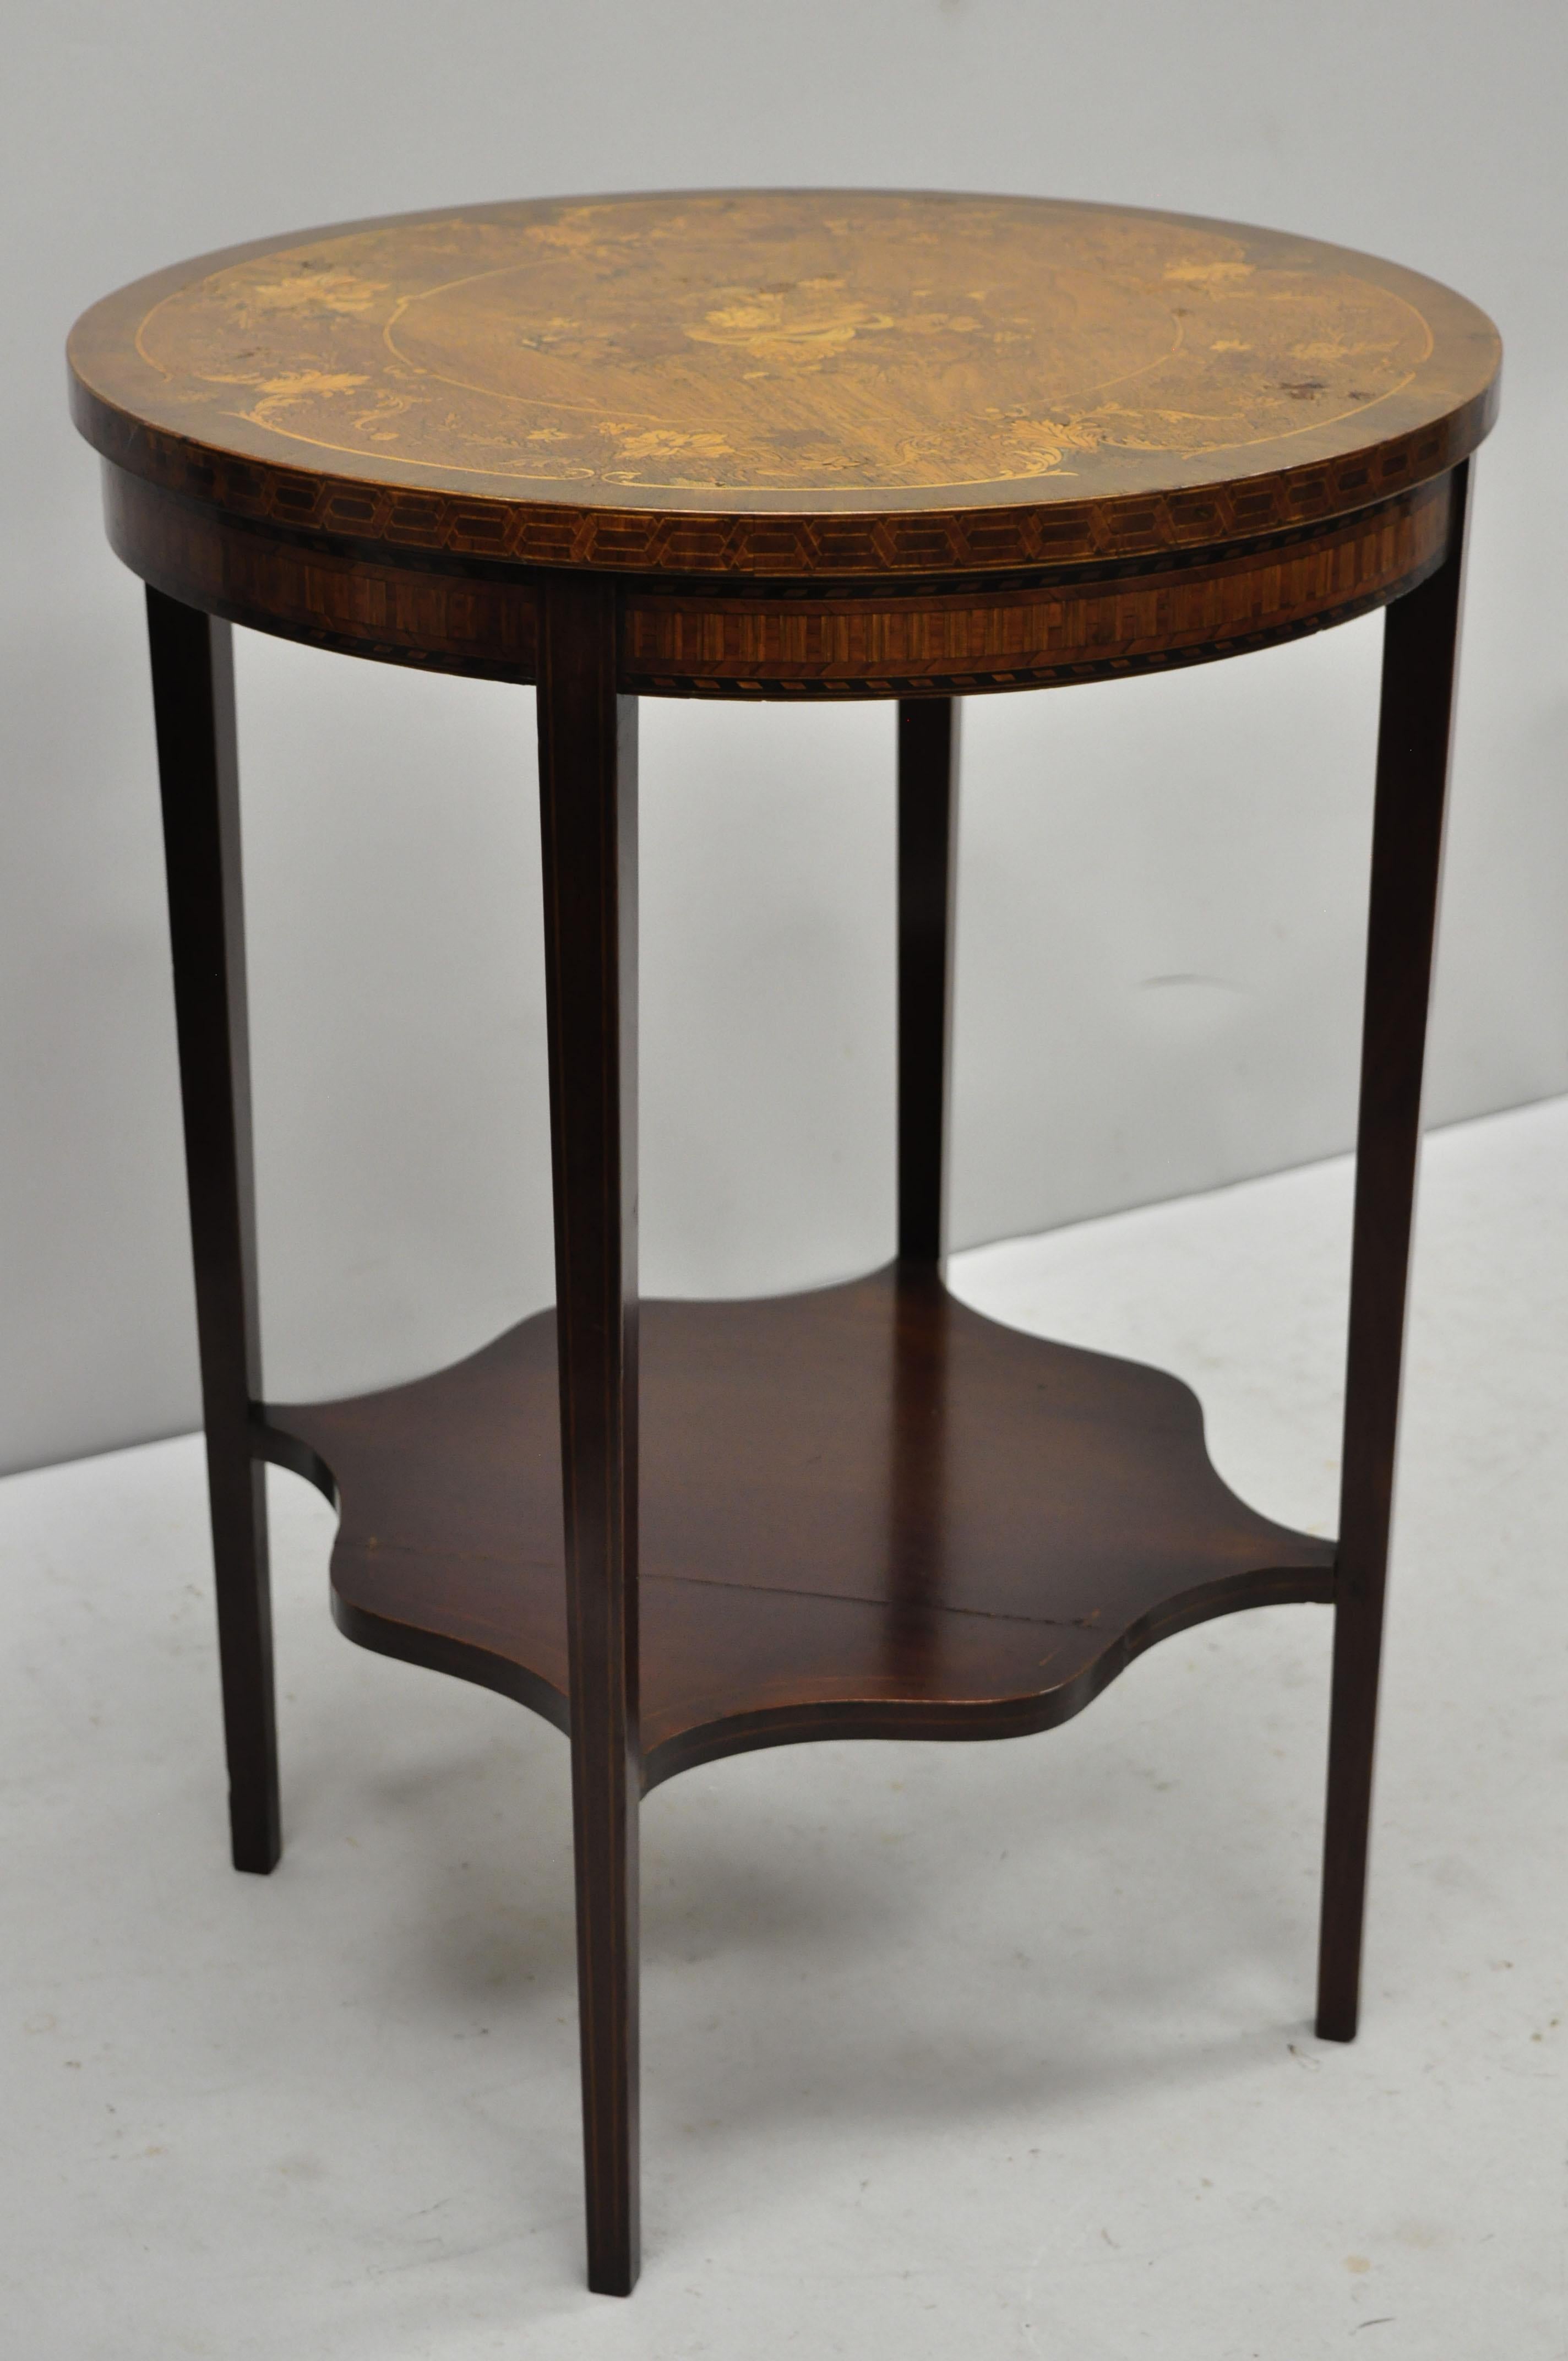 French Edwardian floral marquetry satinwood inlay round accent side table. Item features marquetry inlaid skirt, floral inlaid top, lower shelf, tapered legs, very nice antique item, great style and form, circa early 20th century. Measurements: 28